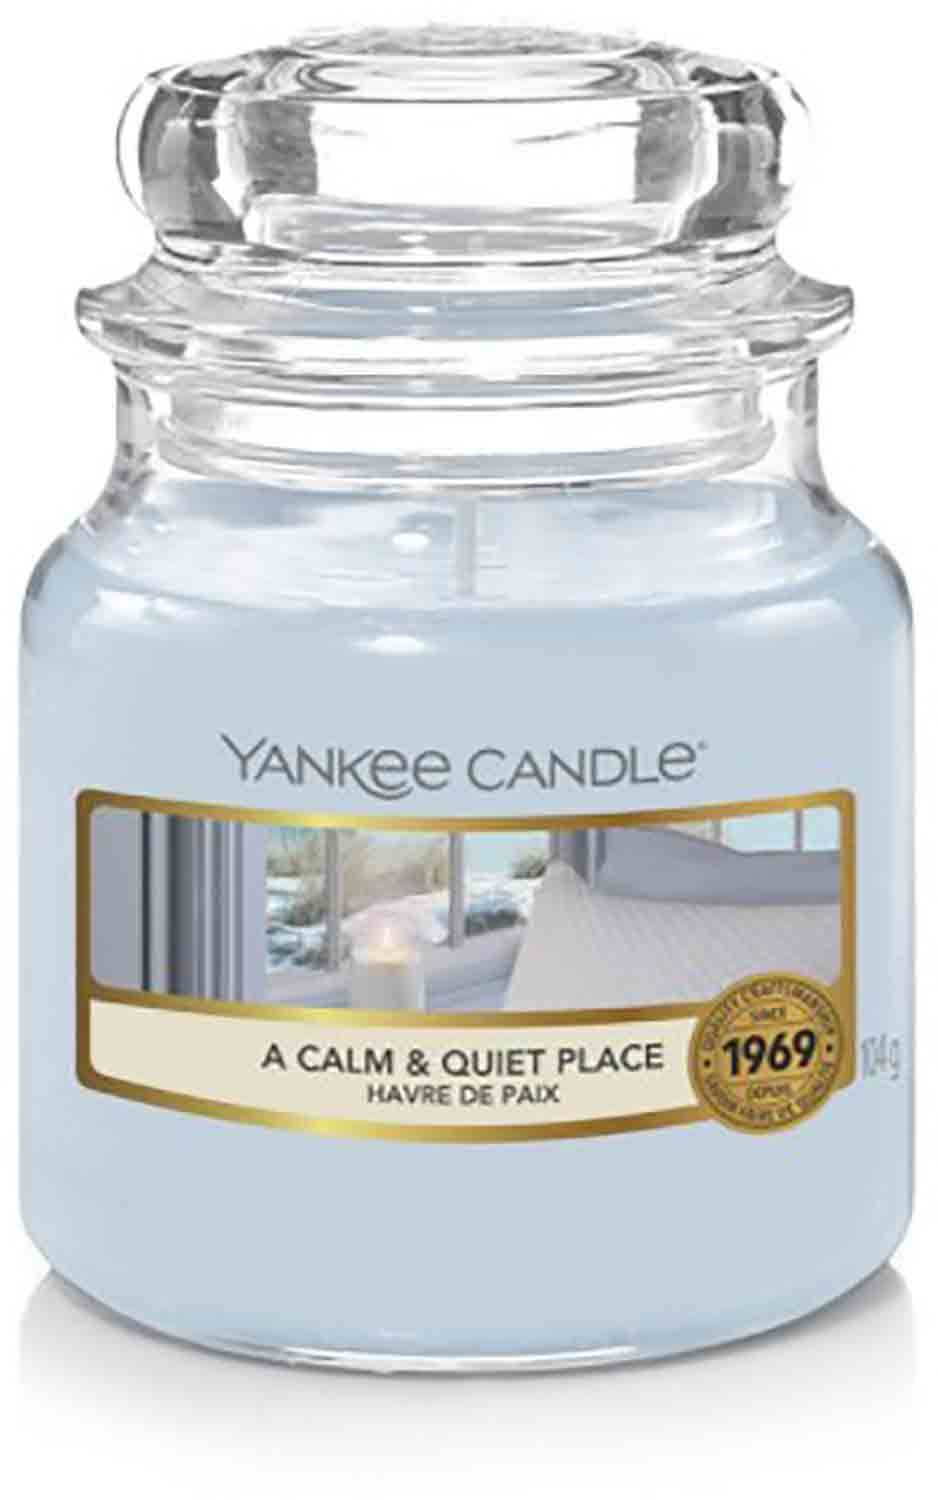 Yankee Candle A Calm & Quiet Place 104g Assorted